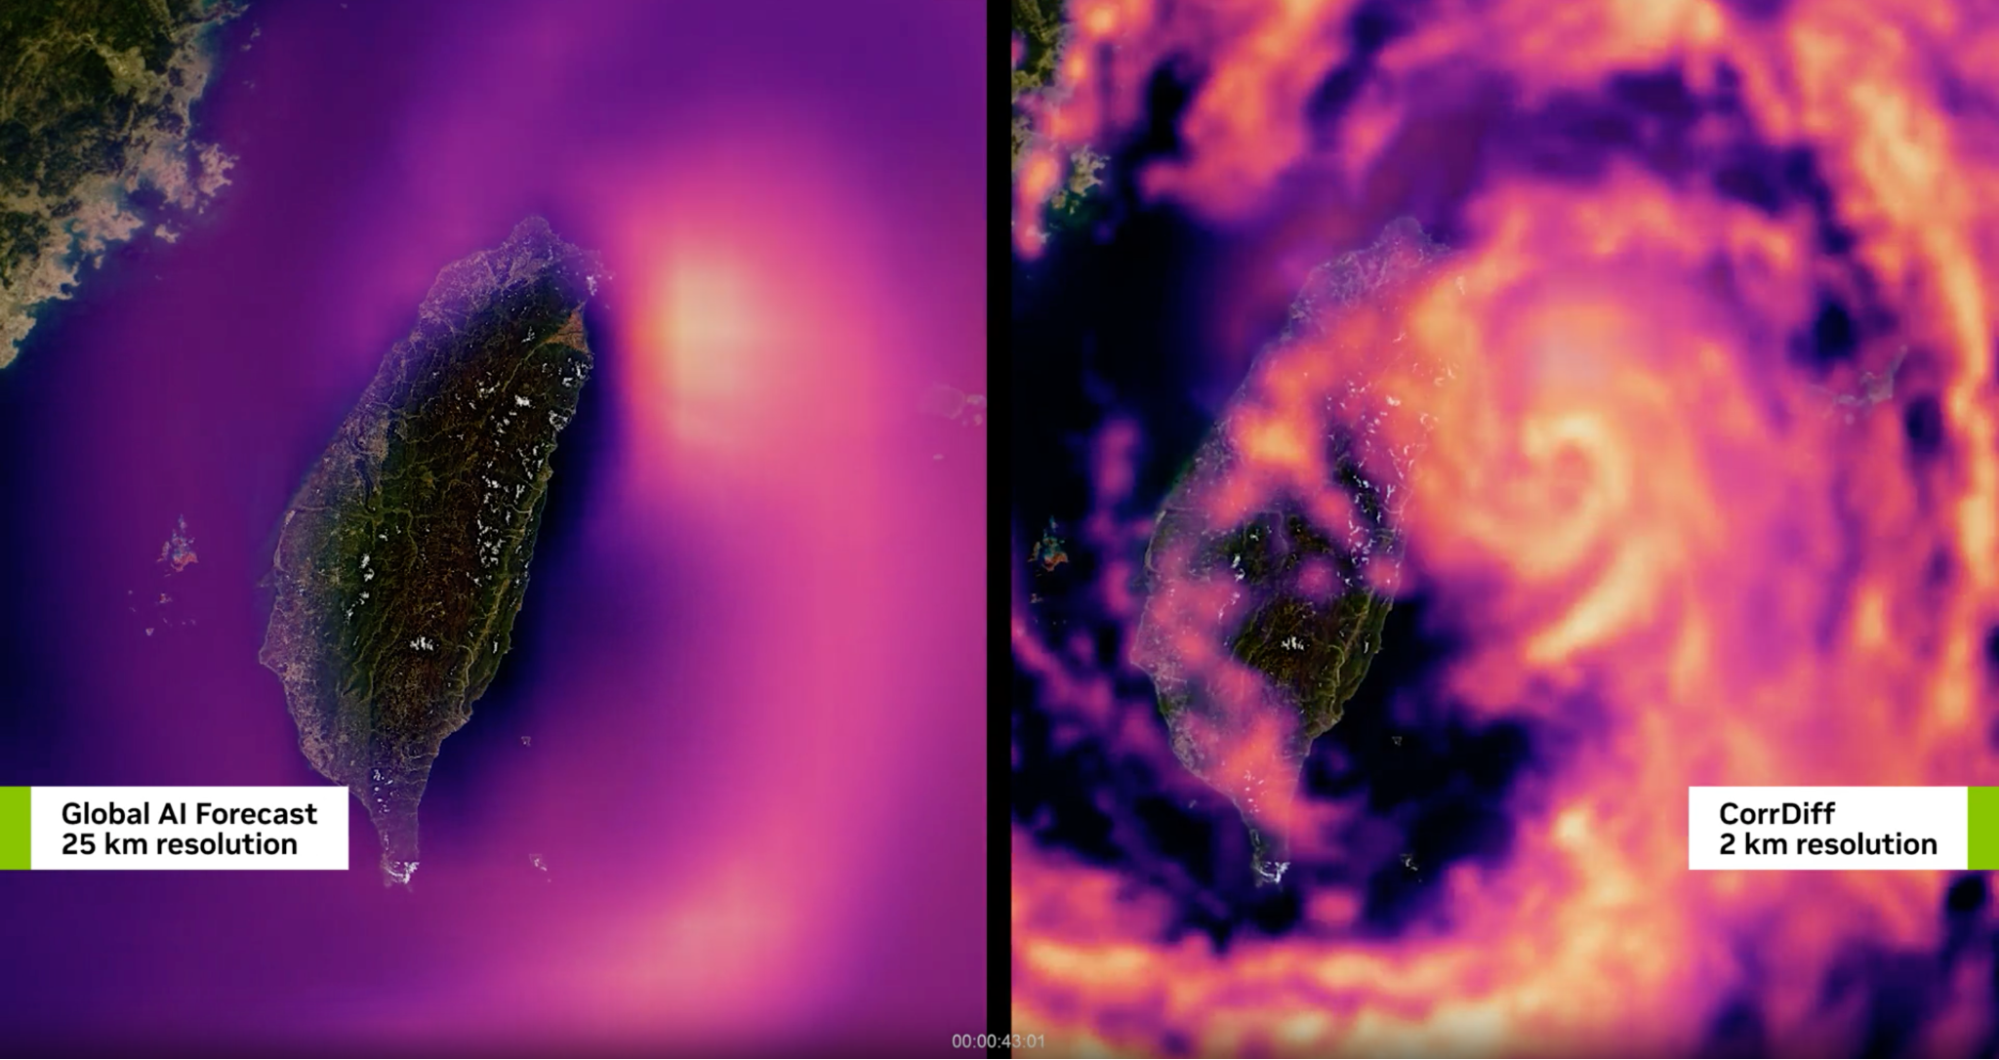 Two images of a typhoon, one from the Global AI Forecast at 25 km resolution and the other from CorrDiff at a 2 km resolution. 